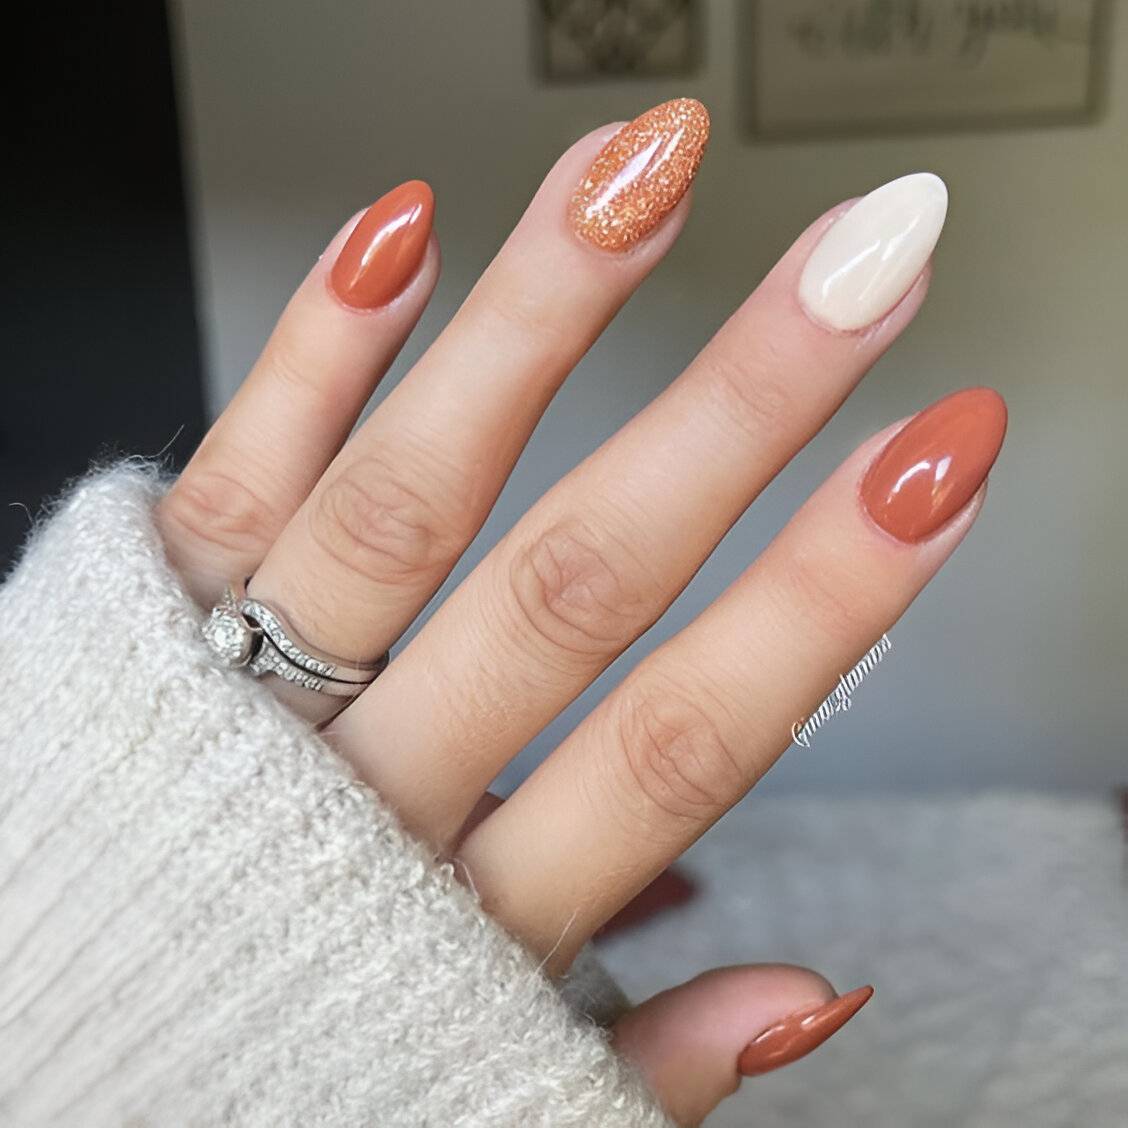 30 Drool-Worthy Short Almond Nail Ideas Every Chic Lady Needs - 217